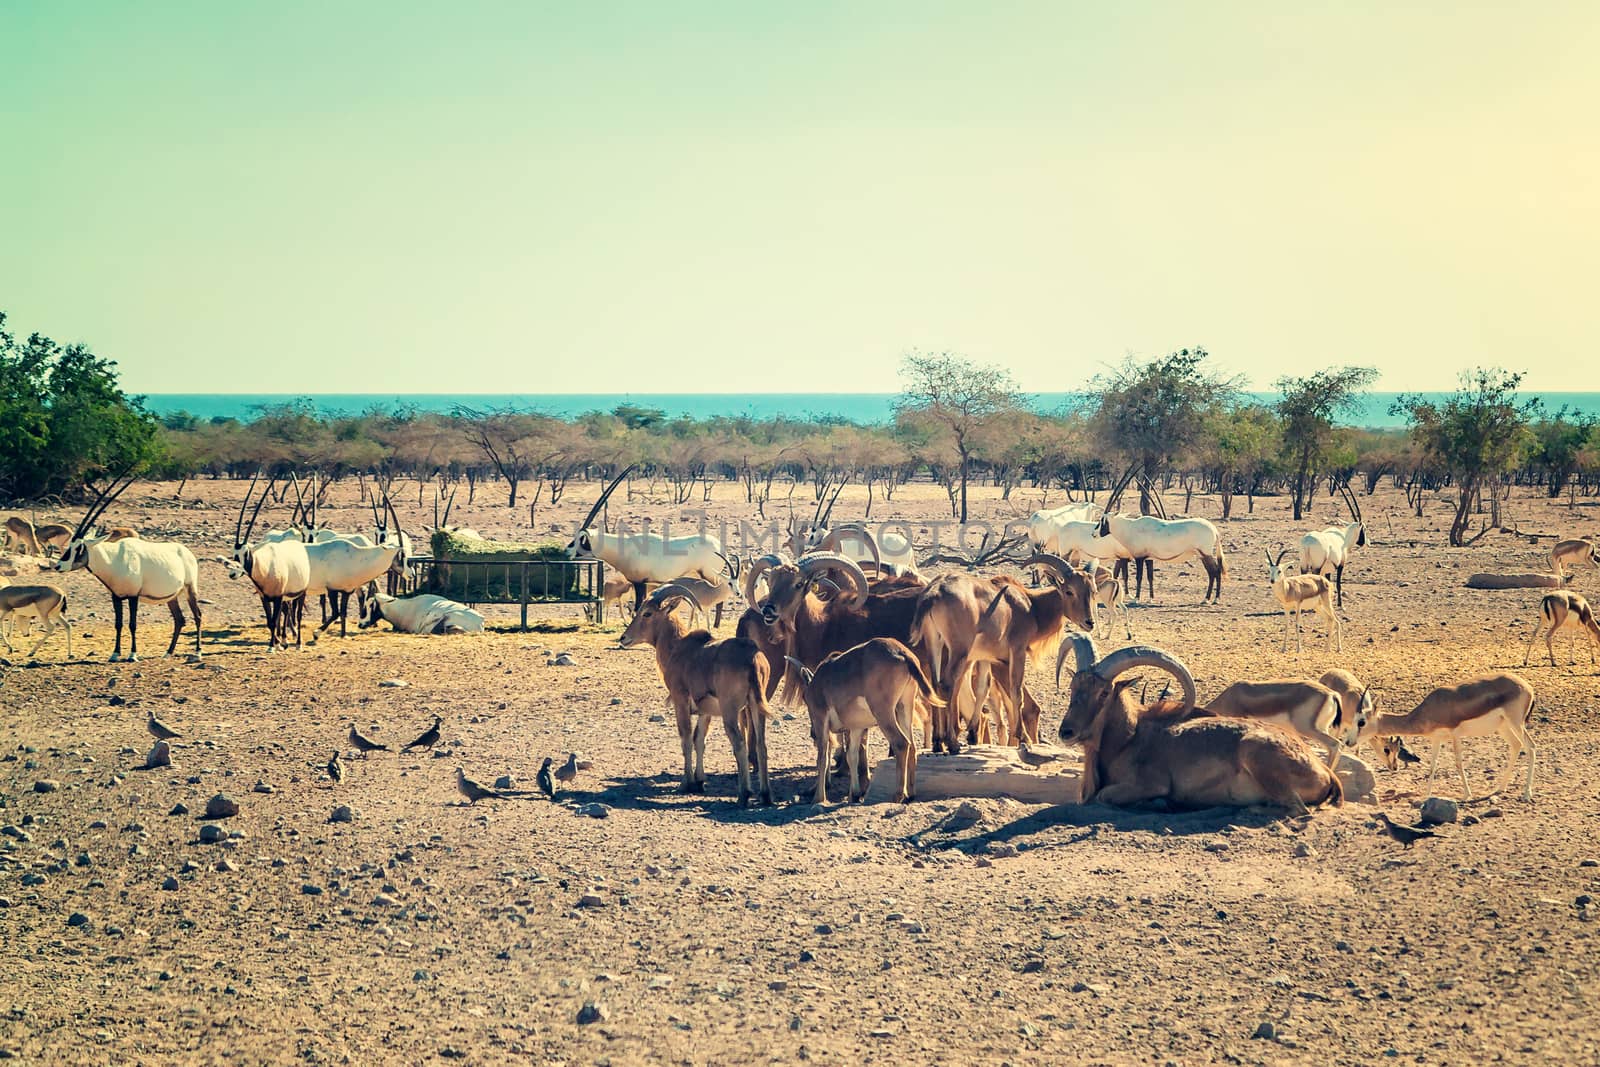 Group of antelopes and mountain sheep in a safari park on the island of Sir Bani Yas, United Arab Emirates.